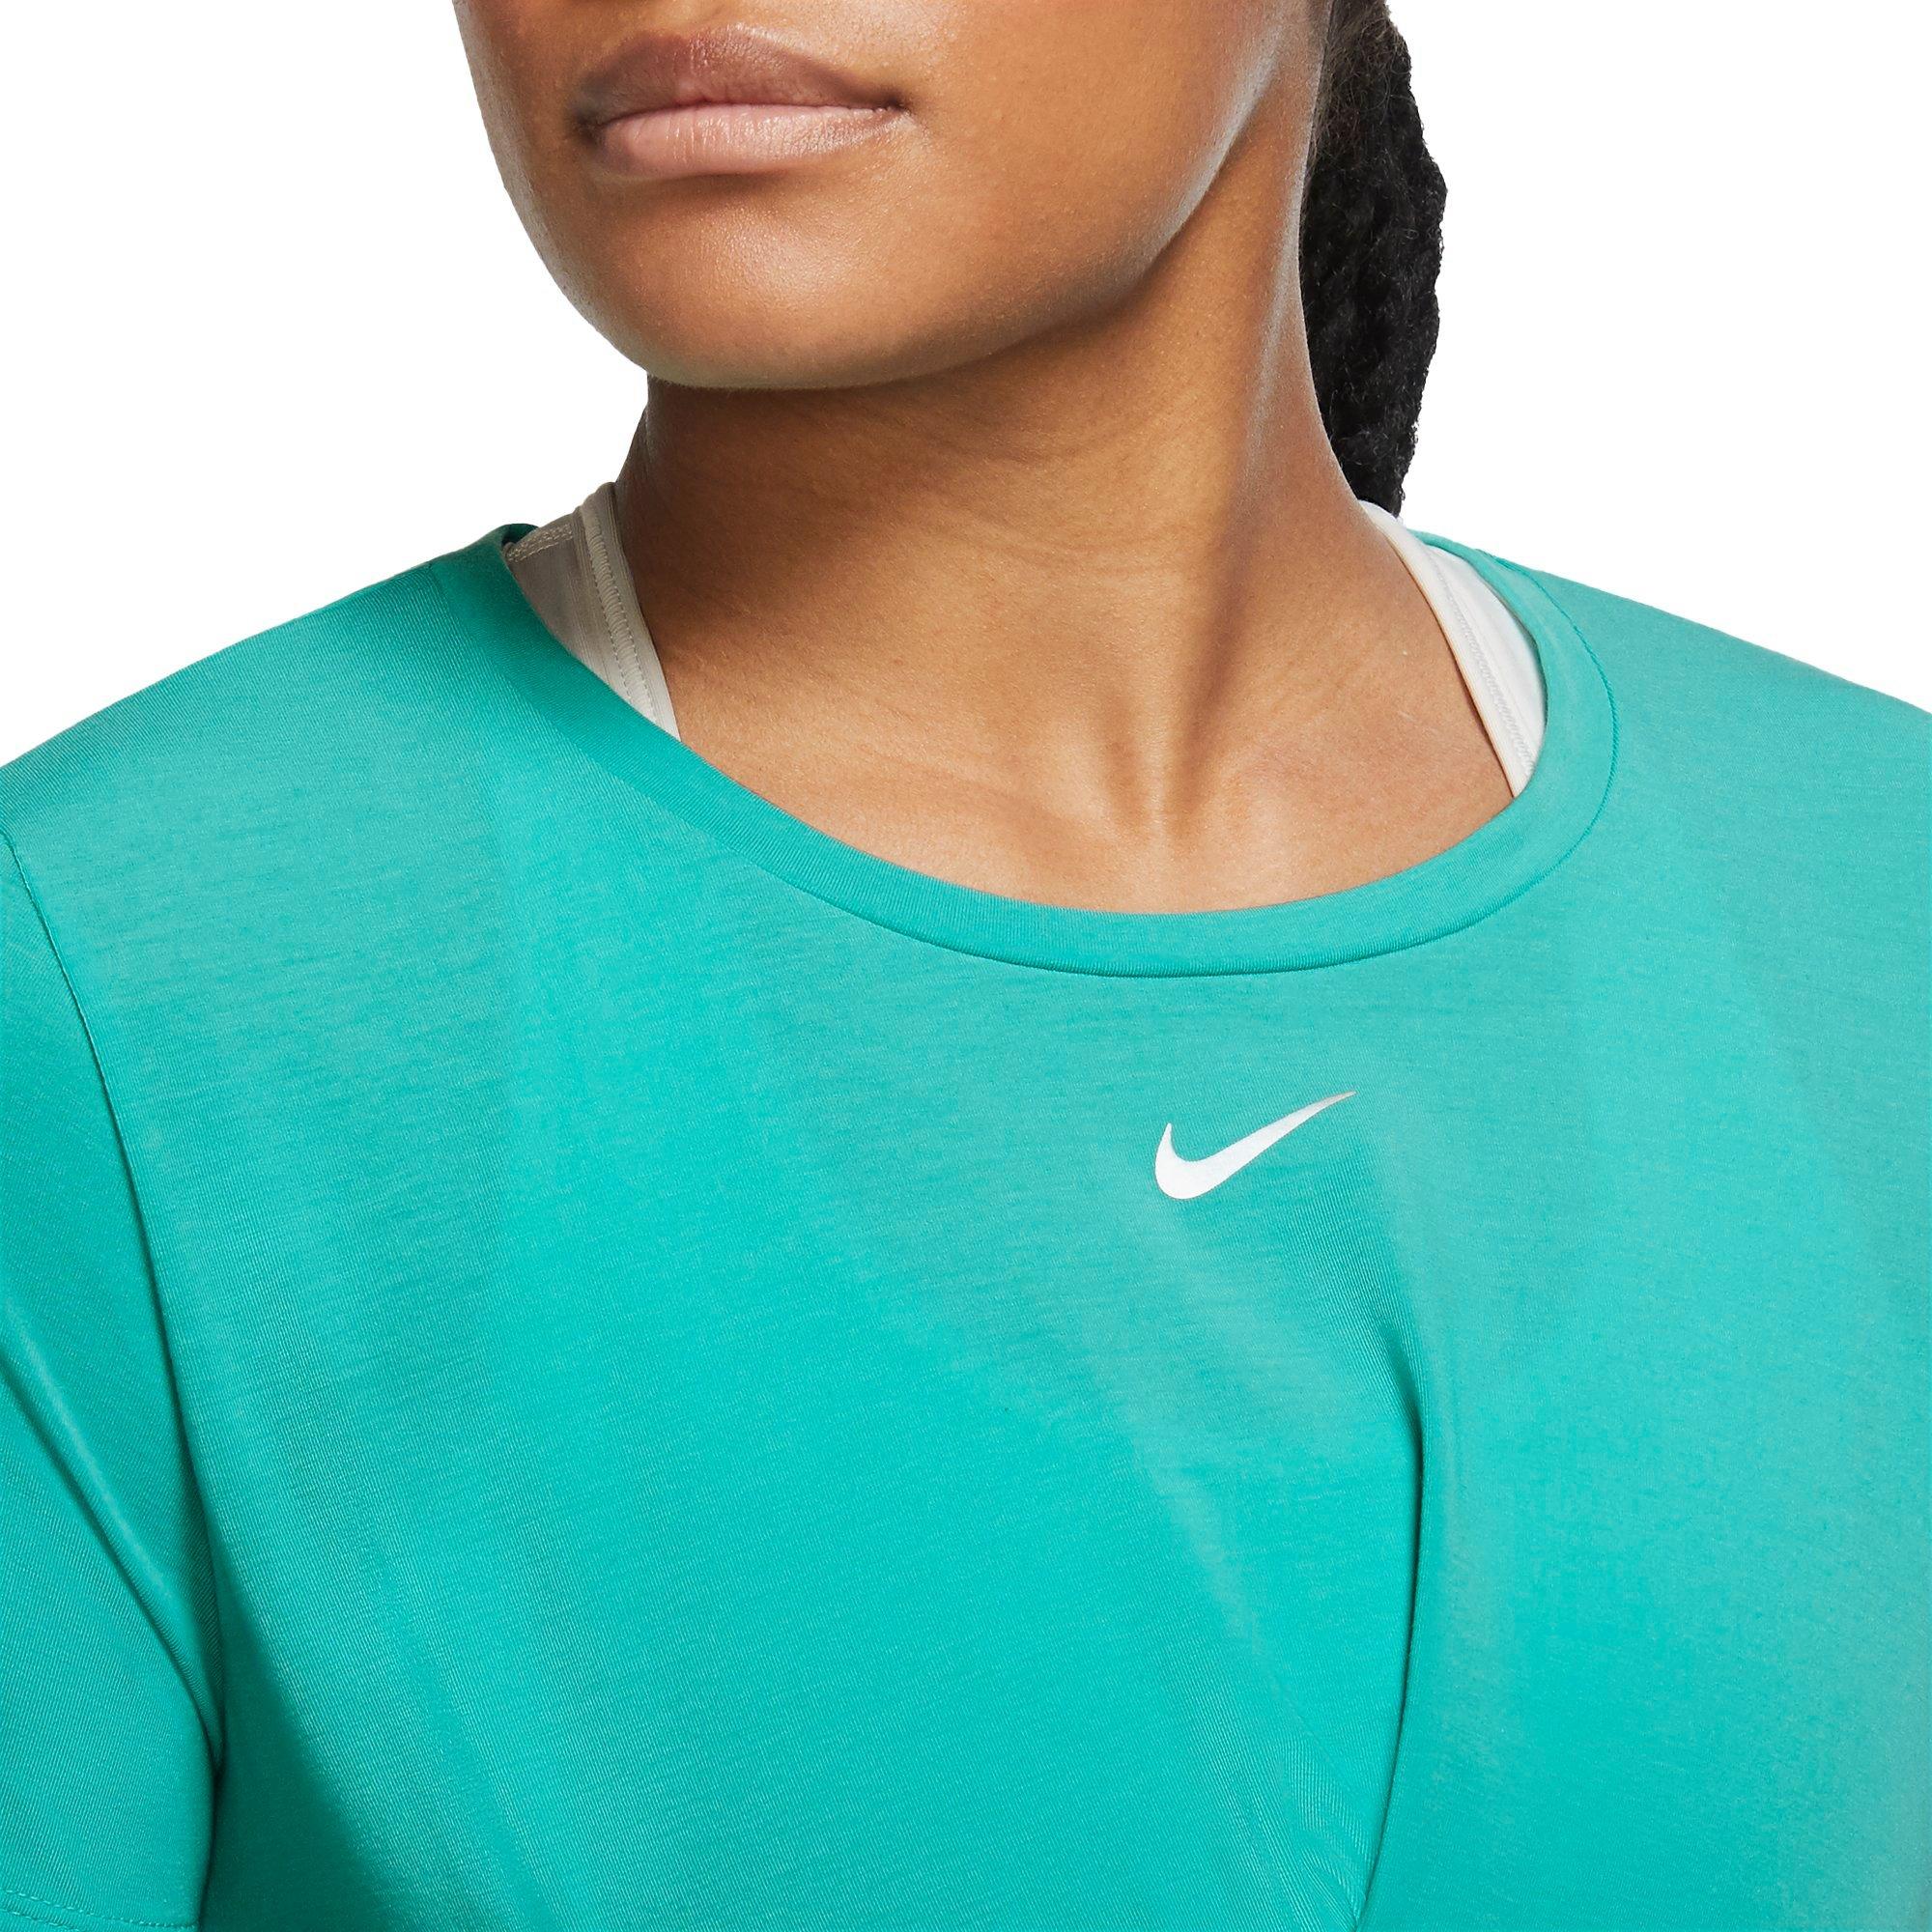 Nike One Luxe Dri Fit Twist Front Top - Red Stardust